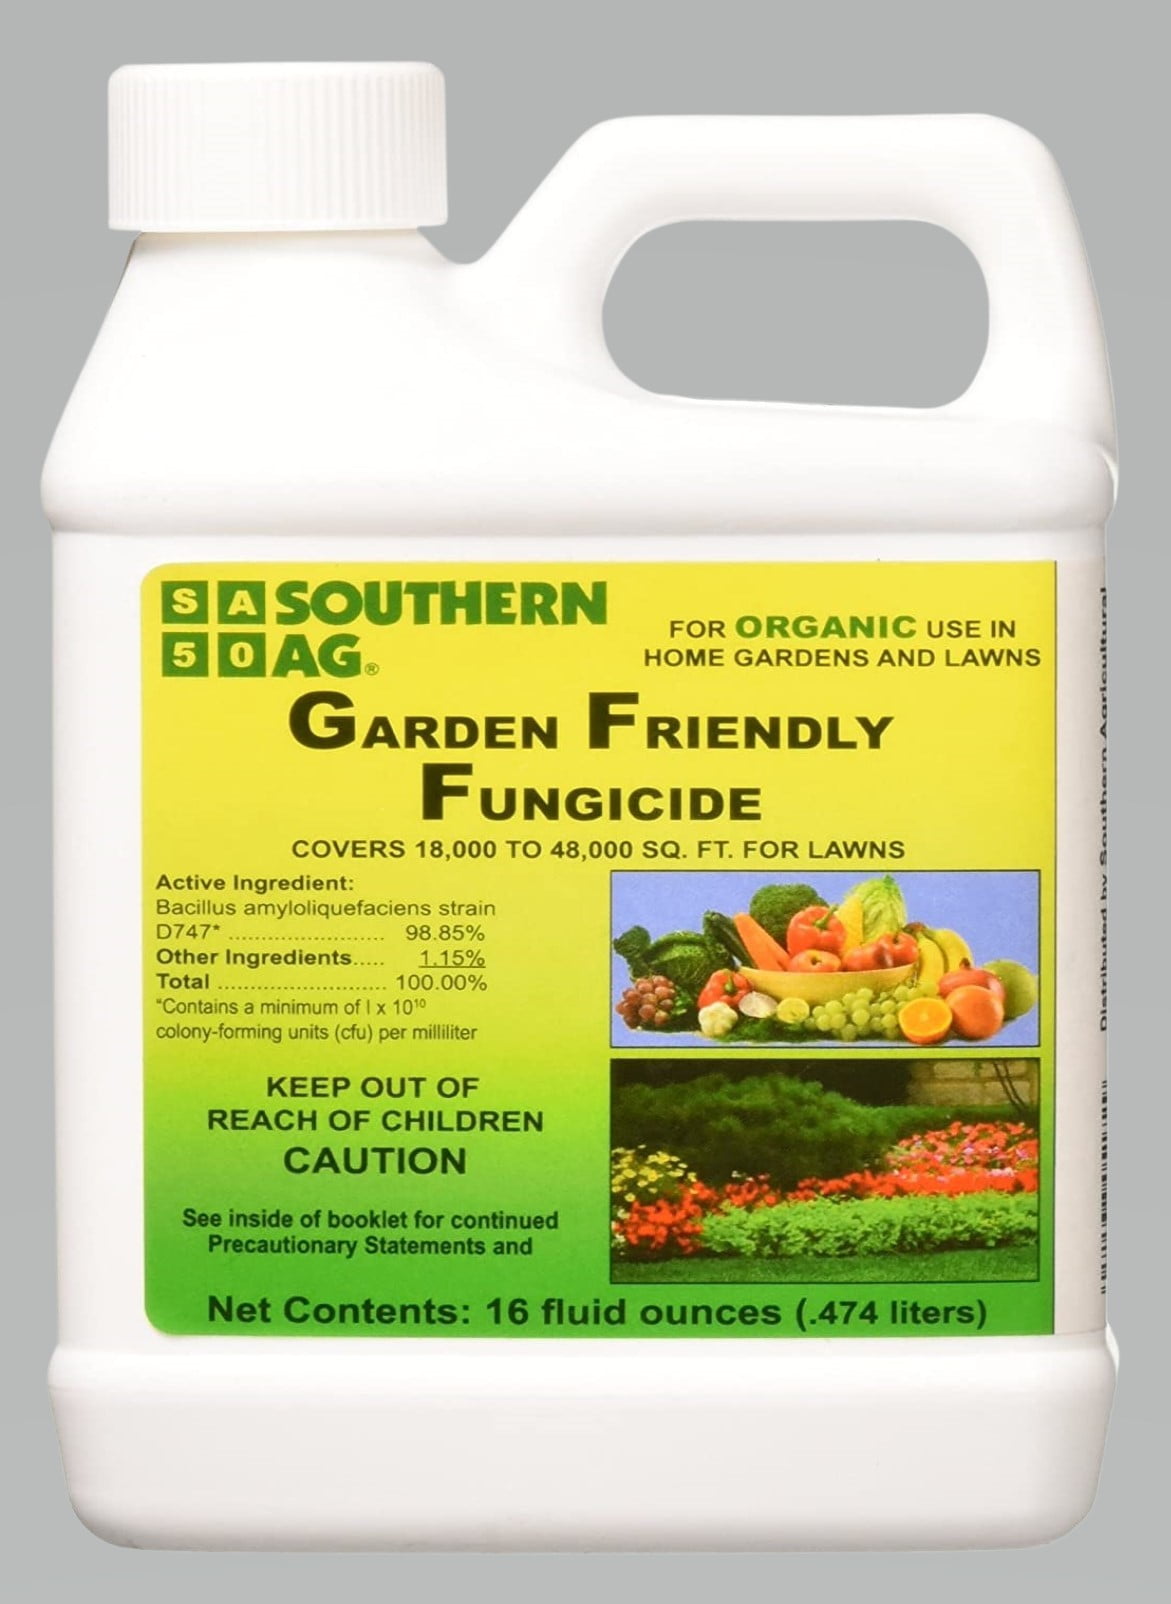 Cerconil Fungicide has tradition, trust and safety!